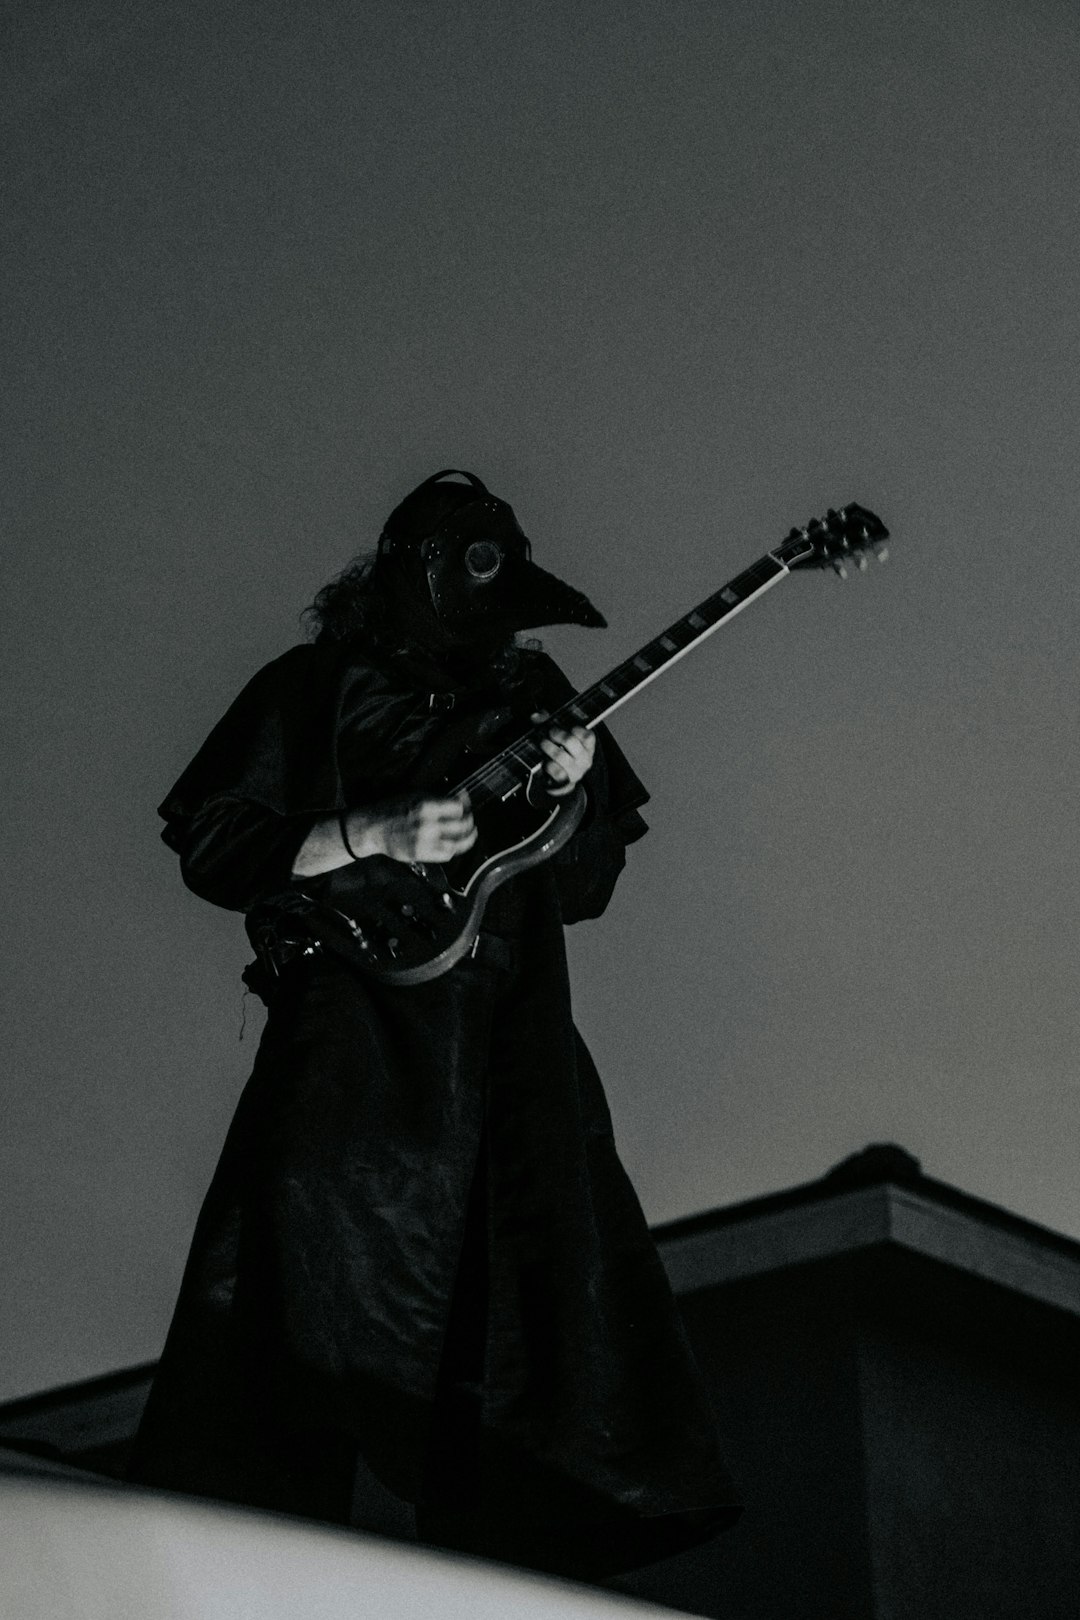 person in black coat playing guitar